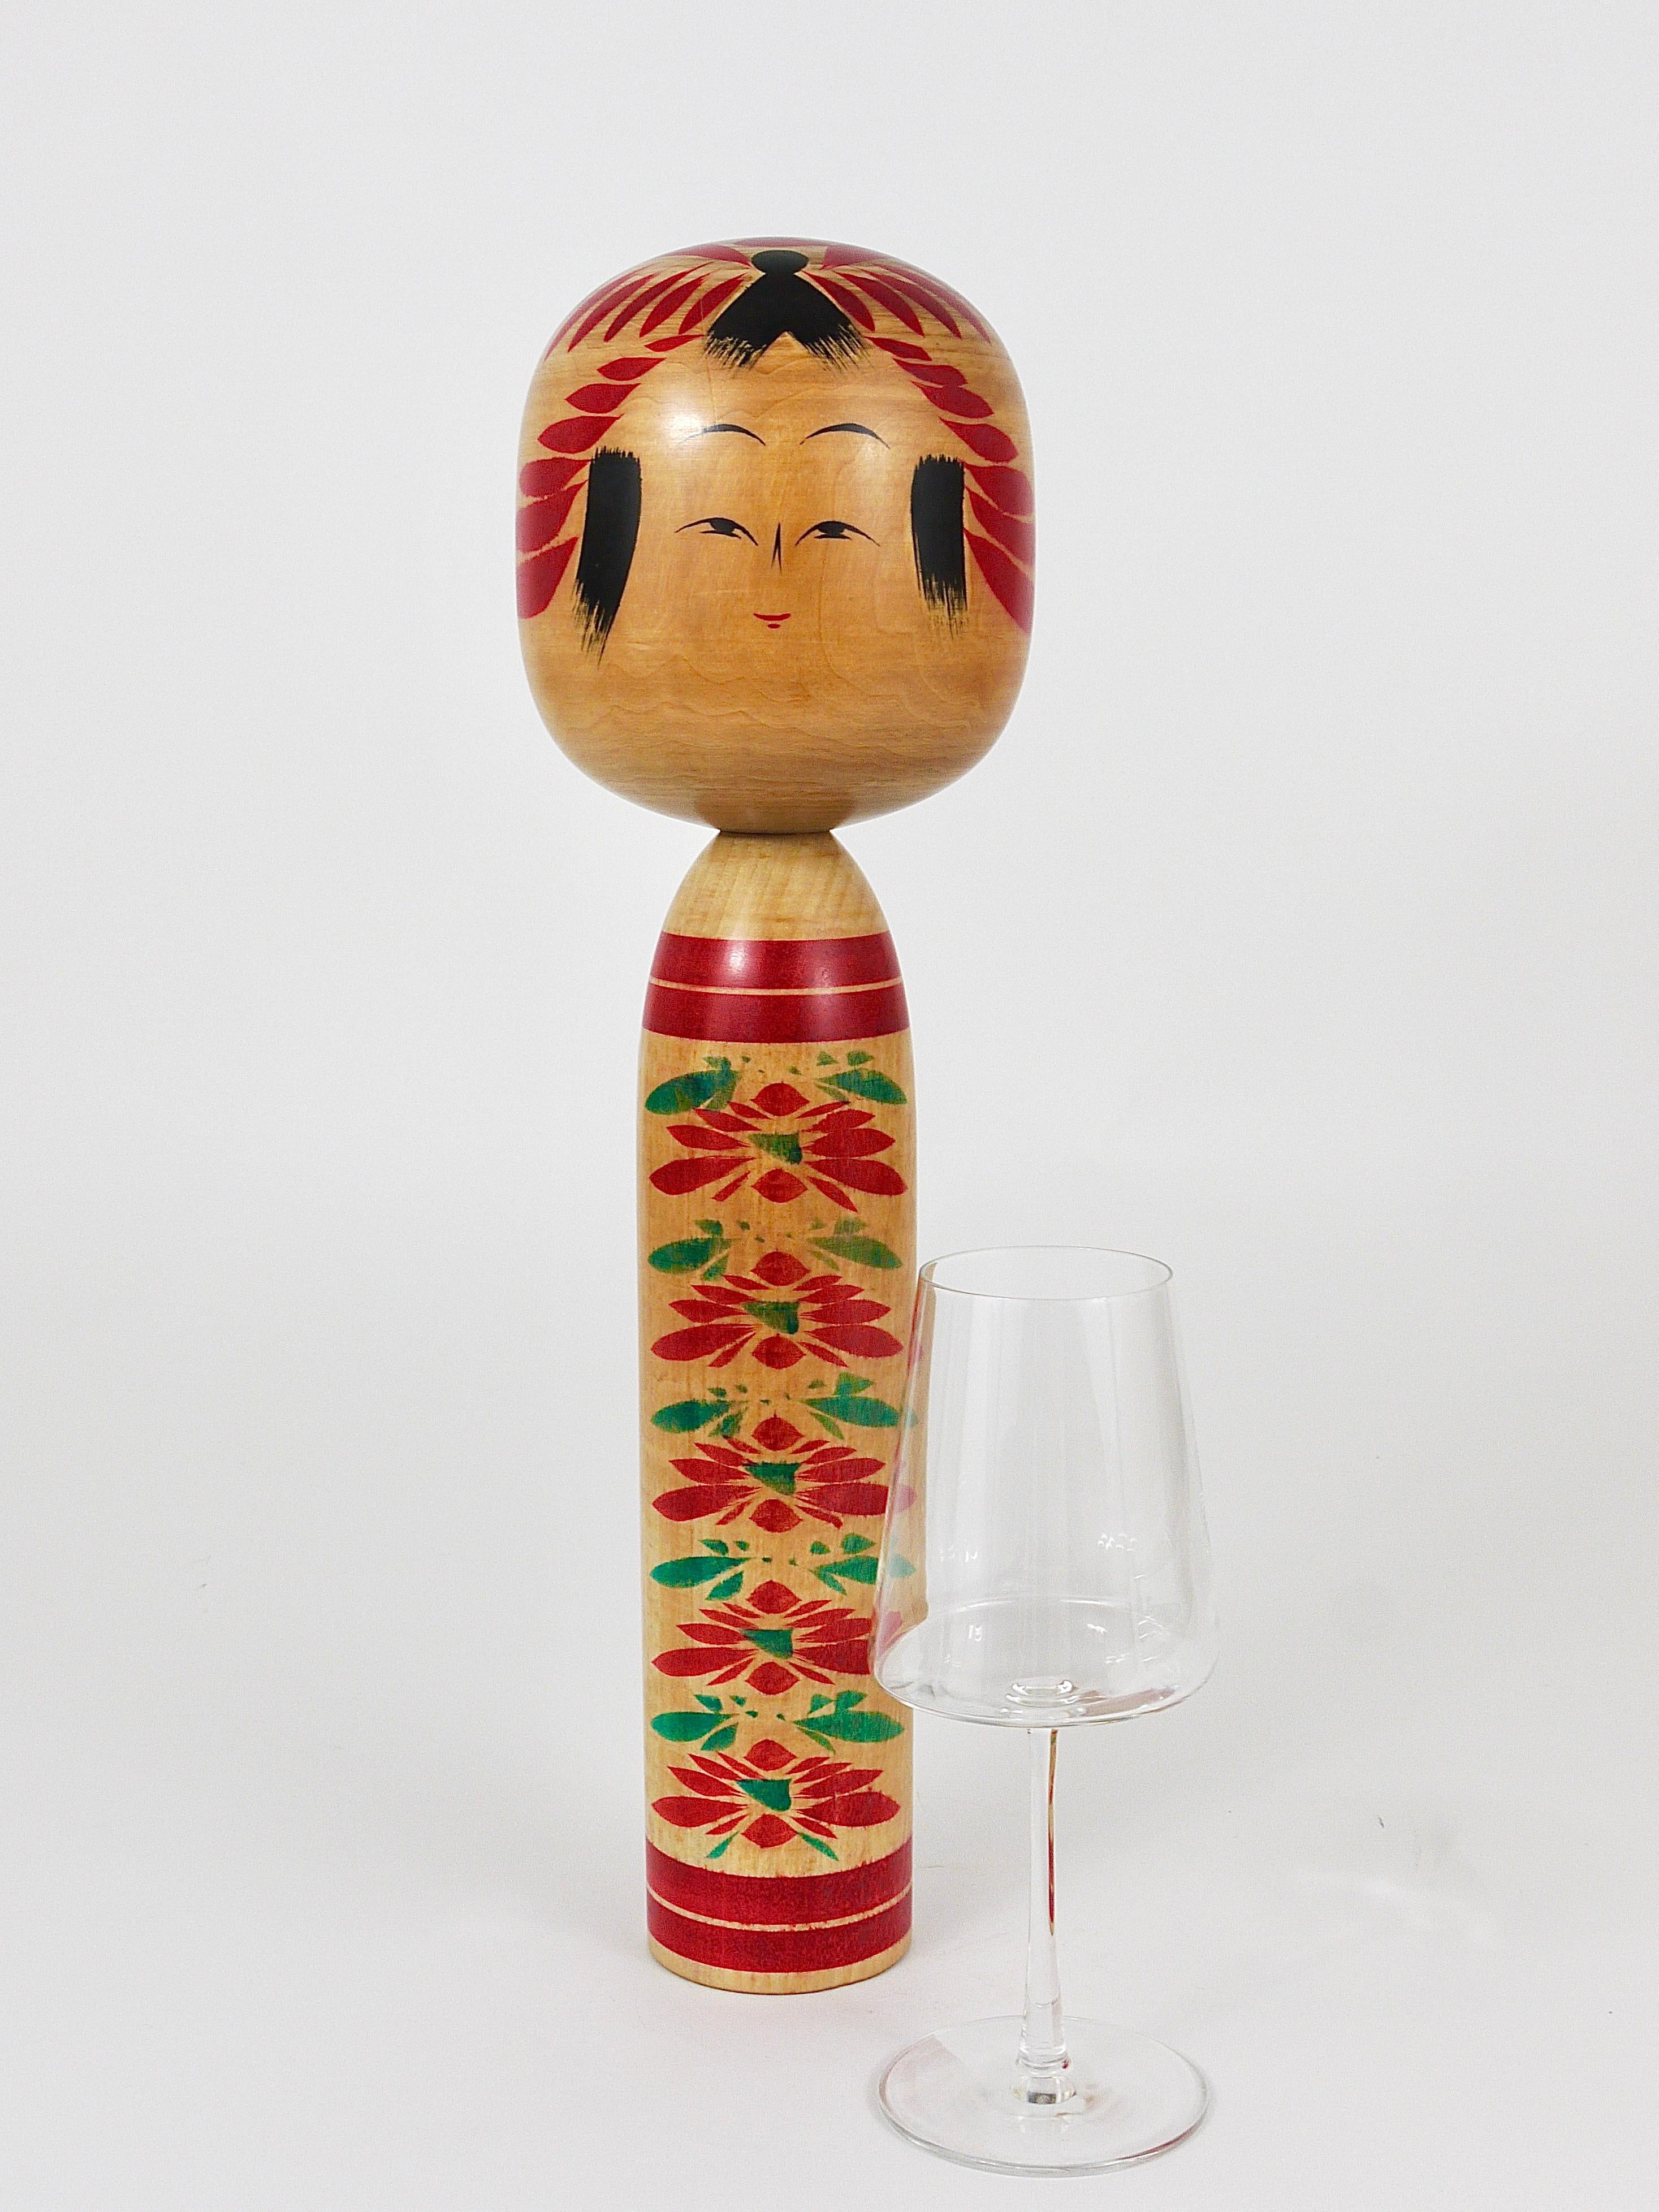 Japanese Decorative Togatta Kokeshi Doll Sculpture from Northern Japan, Hand-Painted For Sale